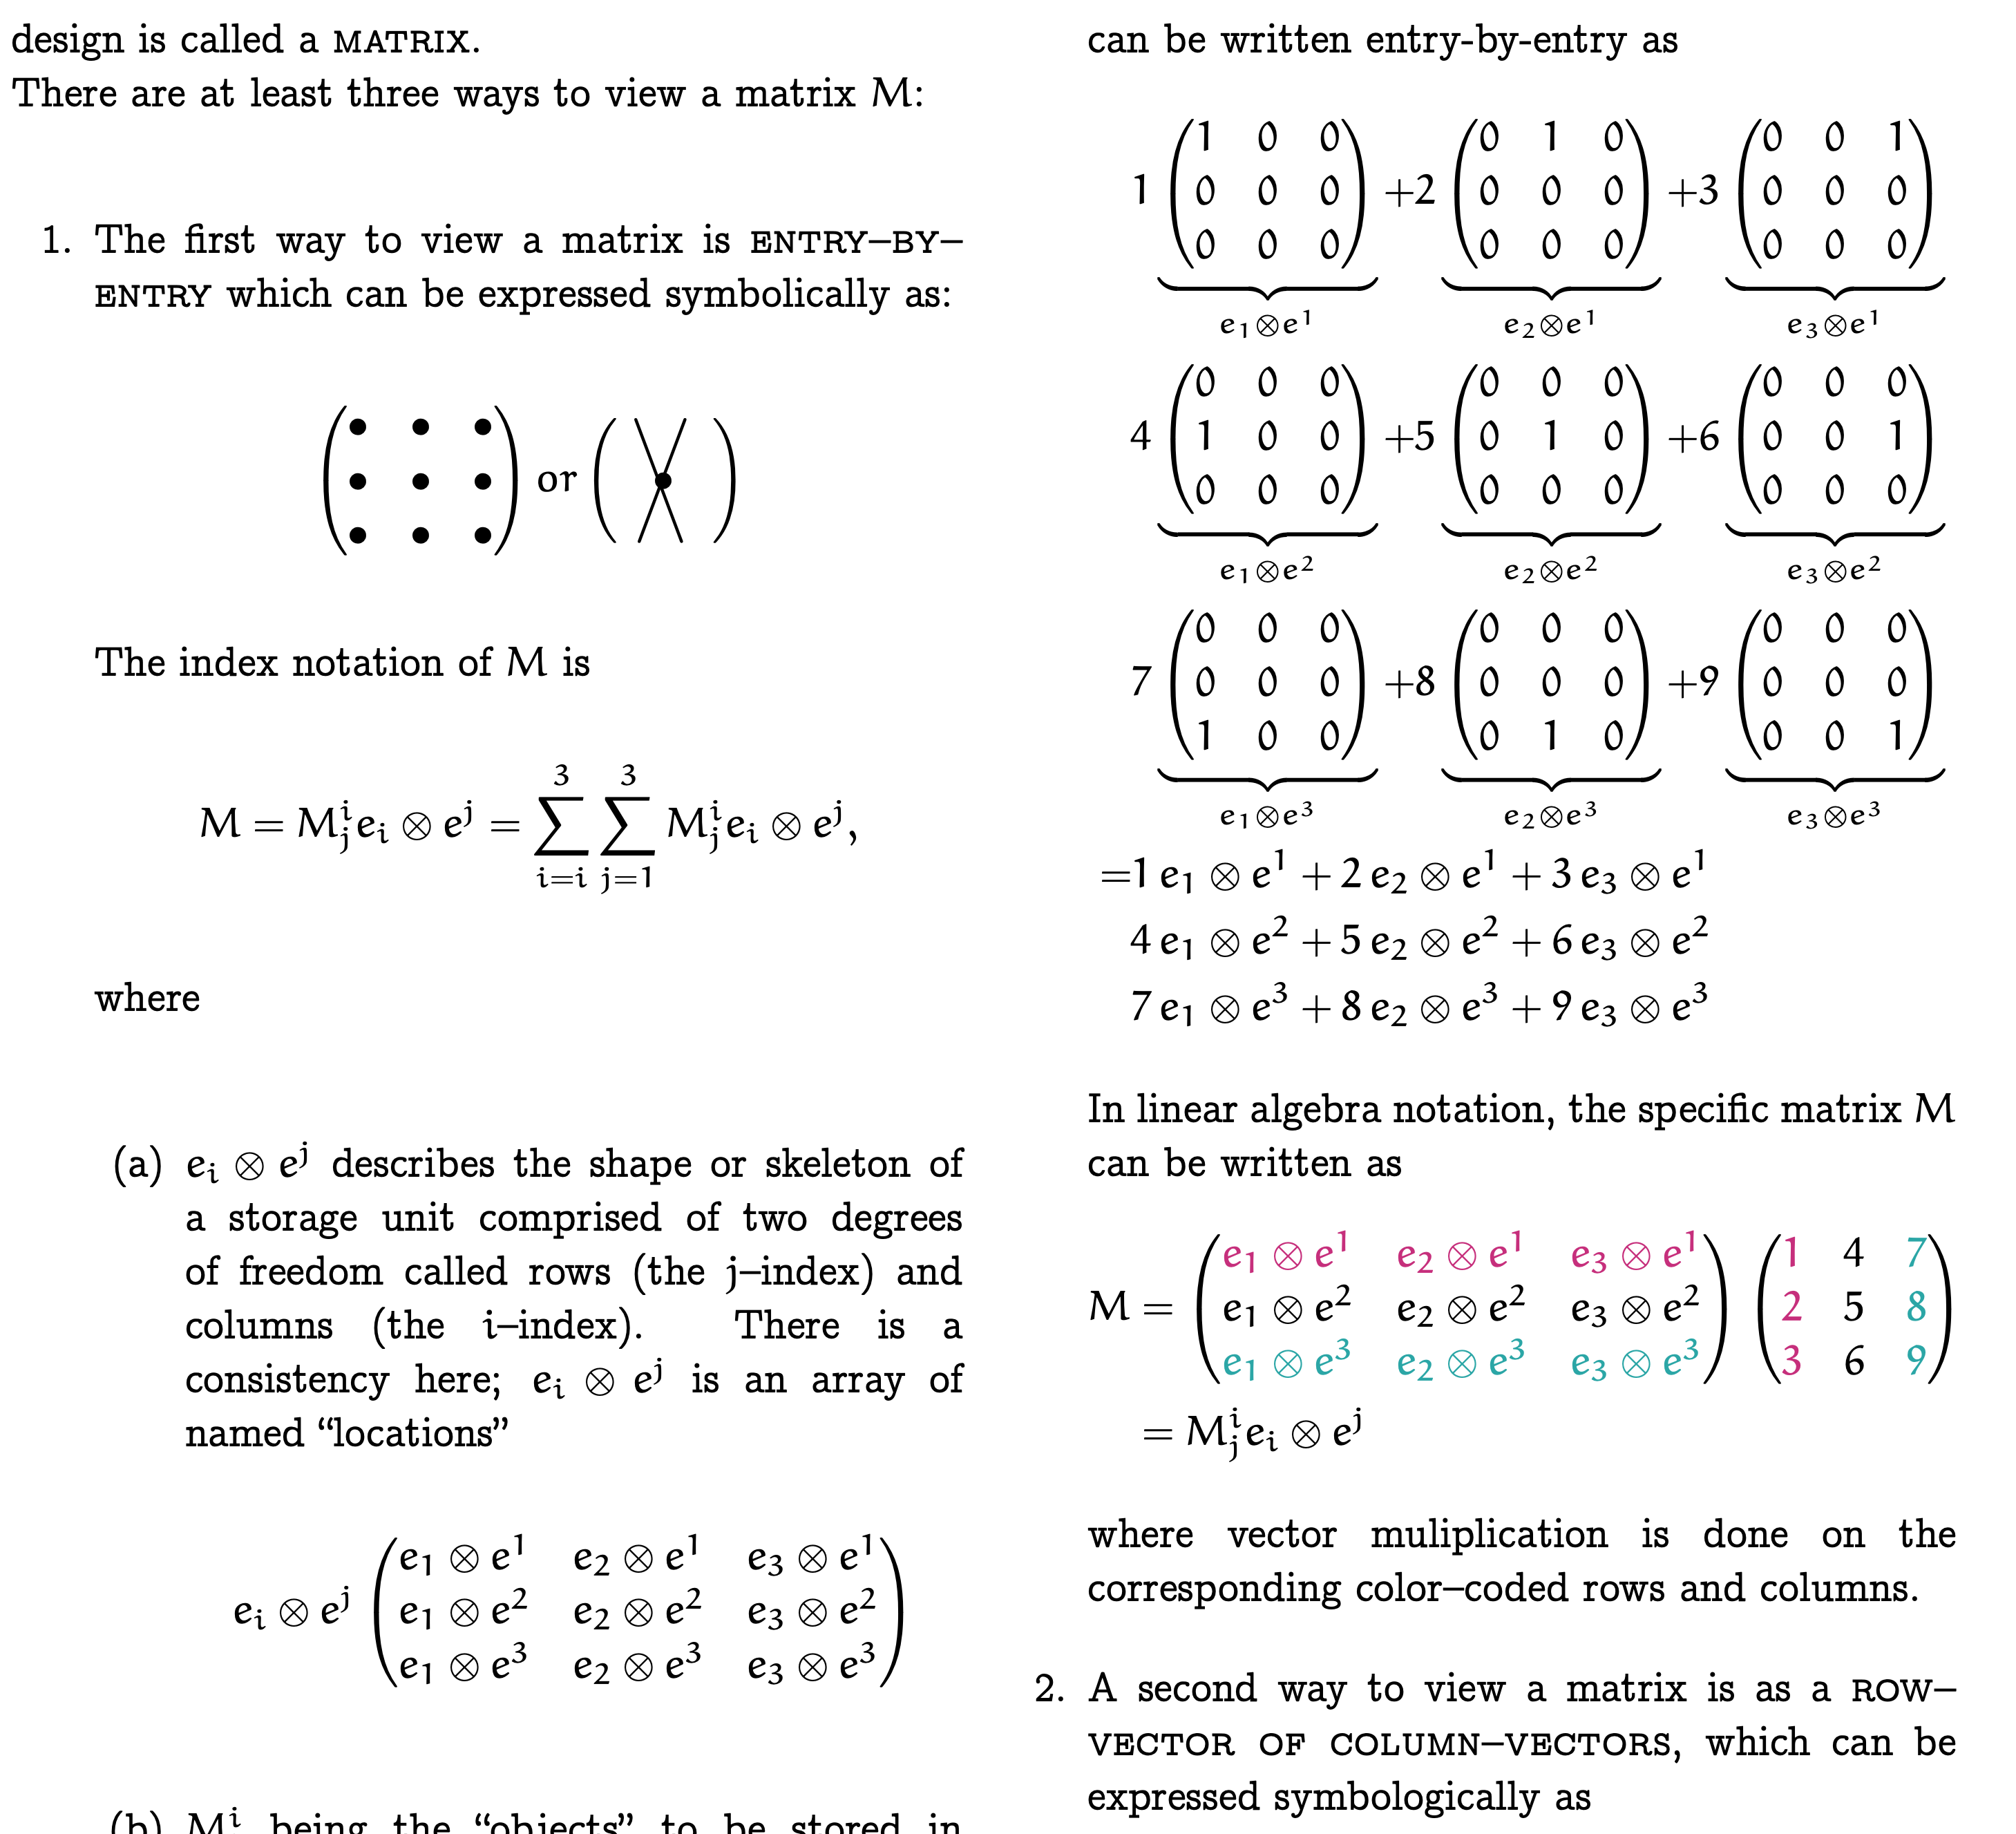 Kernel-Index Notation for Vectors and Matrices. Index notation and the Einstein summation convention bring together components \(D^{i},S_{j},M^{i}_{j}\) (objects to be stored) with their bases \(e_{i},e^{j}, e^{j} \otimes e_{i}\) (storage space)